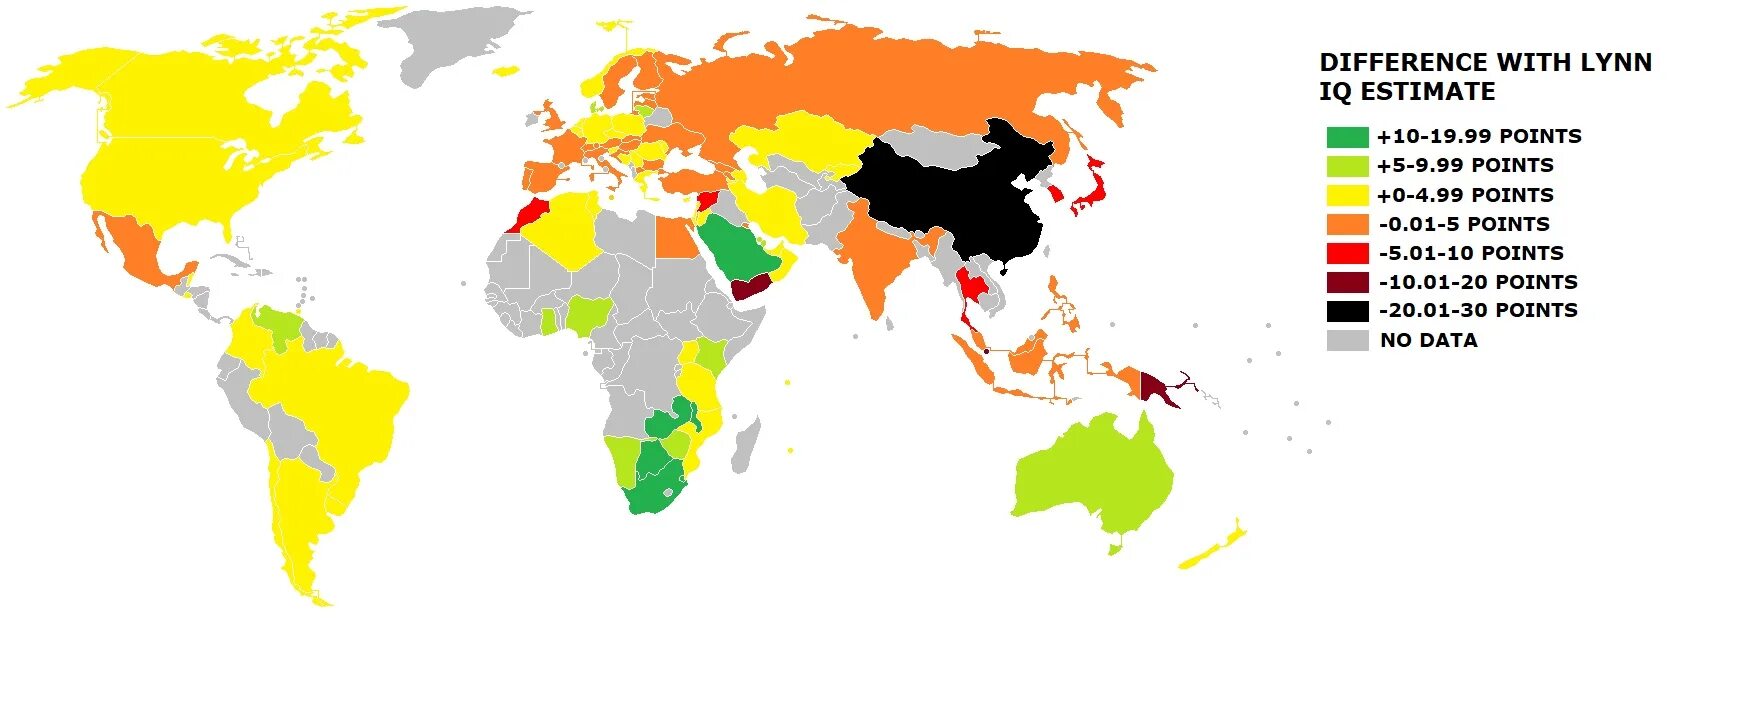 IQ and age. IQ by Country. IQ В мире. IQ in different Countries. Country differences